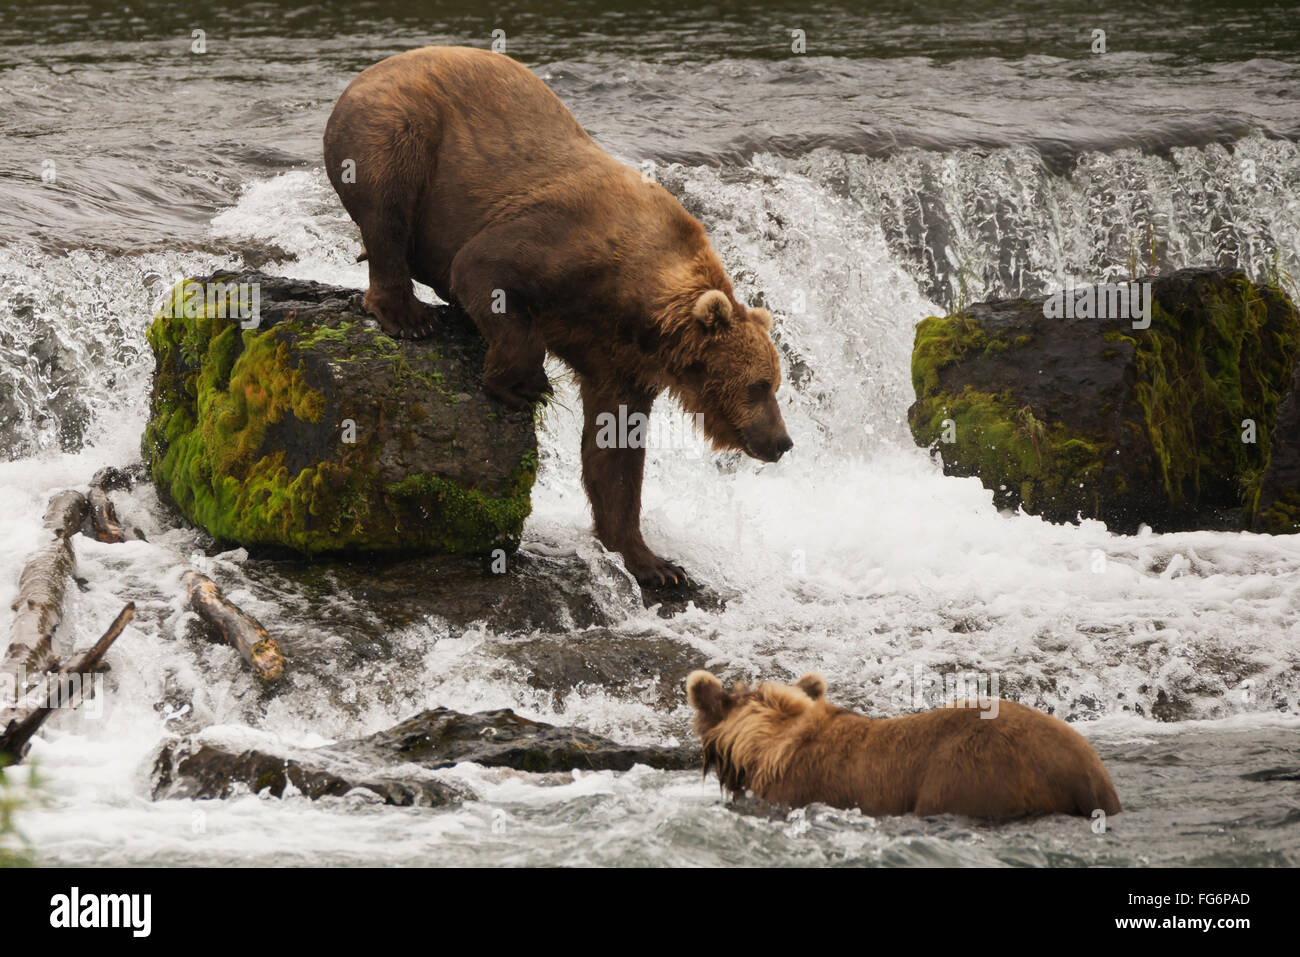 A brown bear (ursus arctos) climbing down a moss covered rock in Brooks River while fishing for salmon, with another bear watching from below Stock Photo